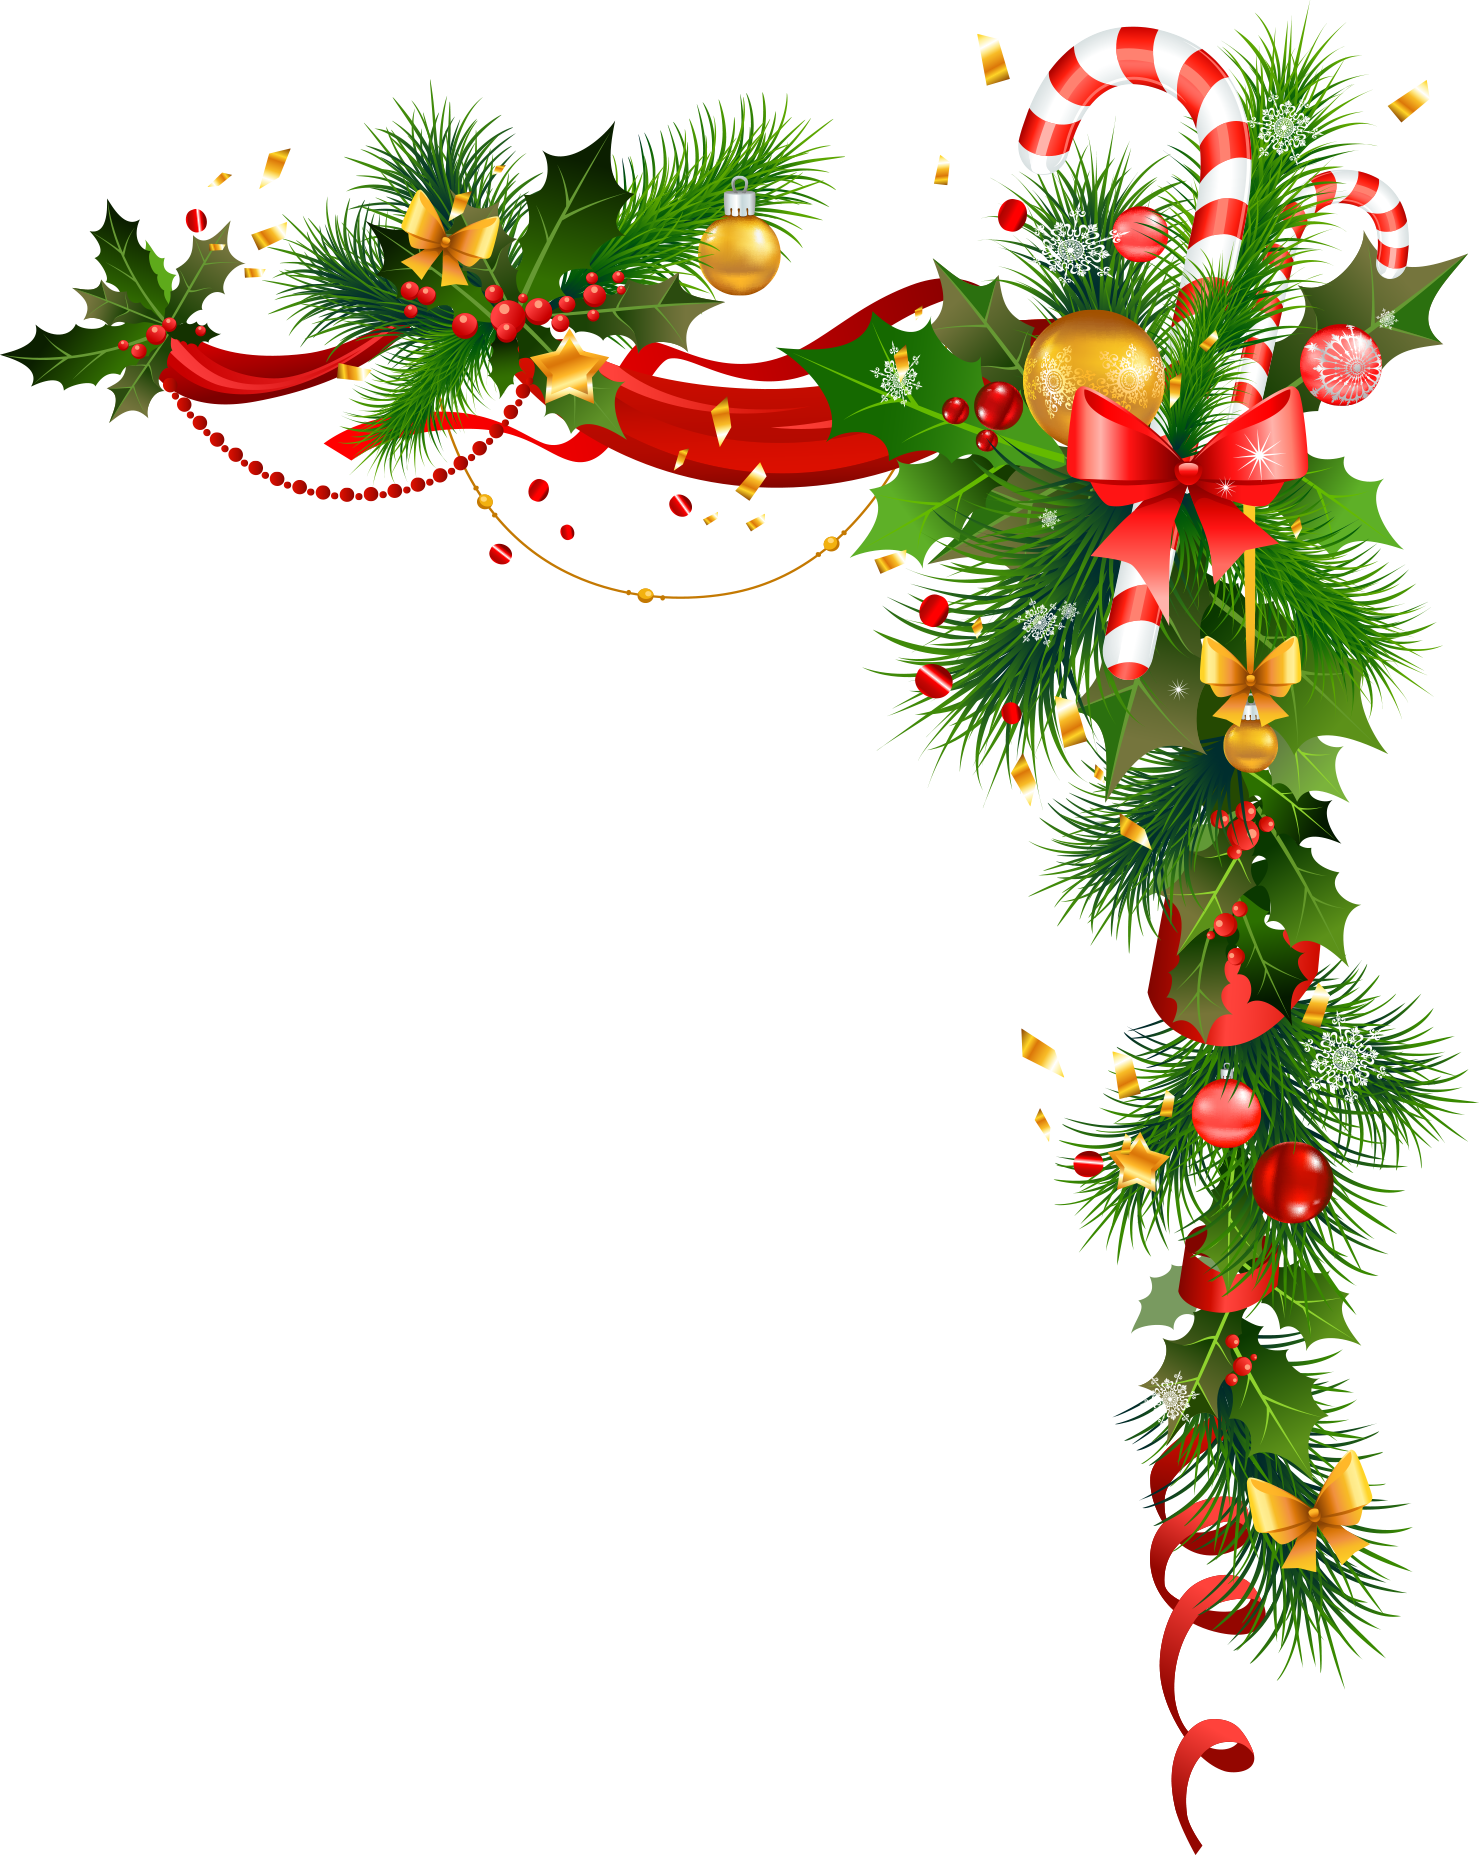 Festive Christmas Garland Decoration.png PNG